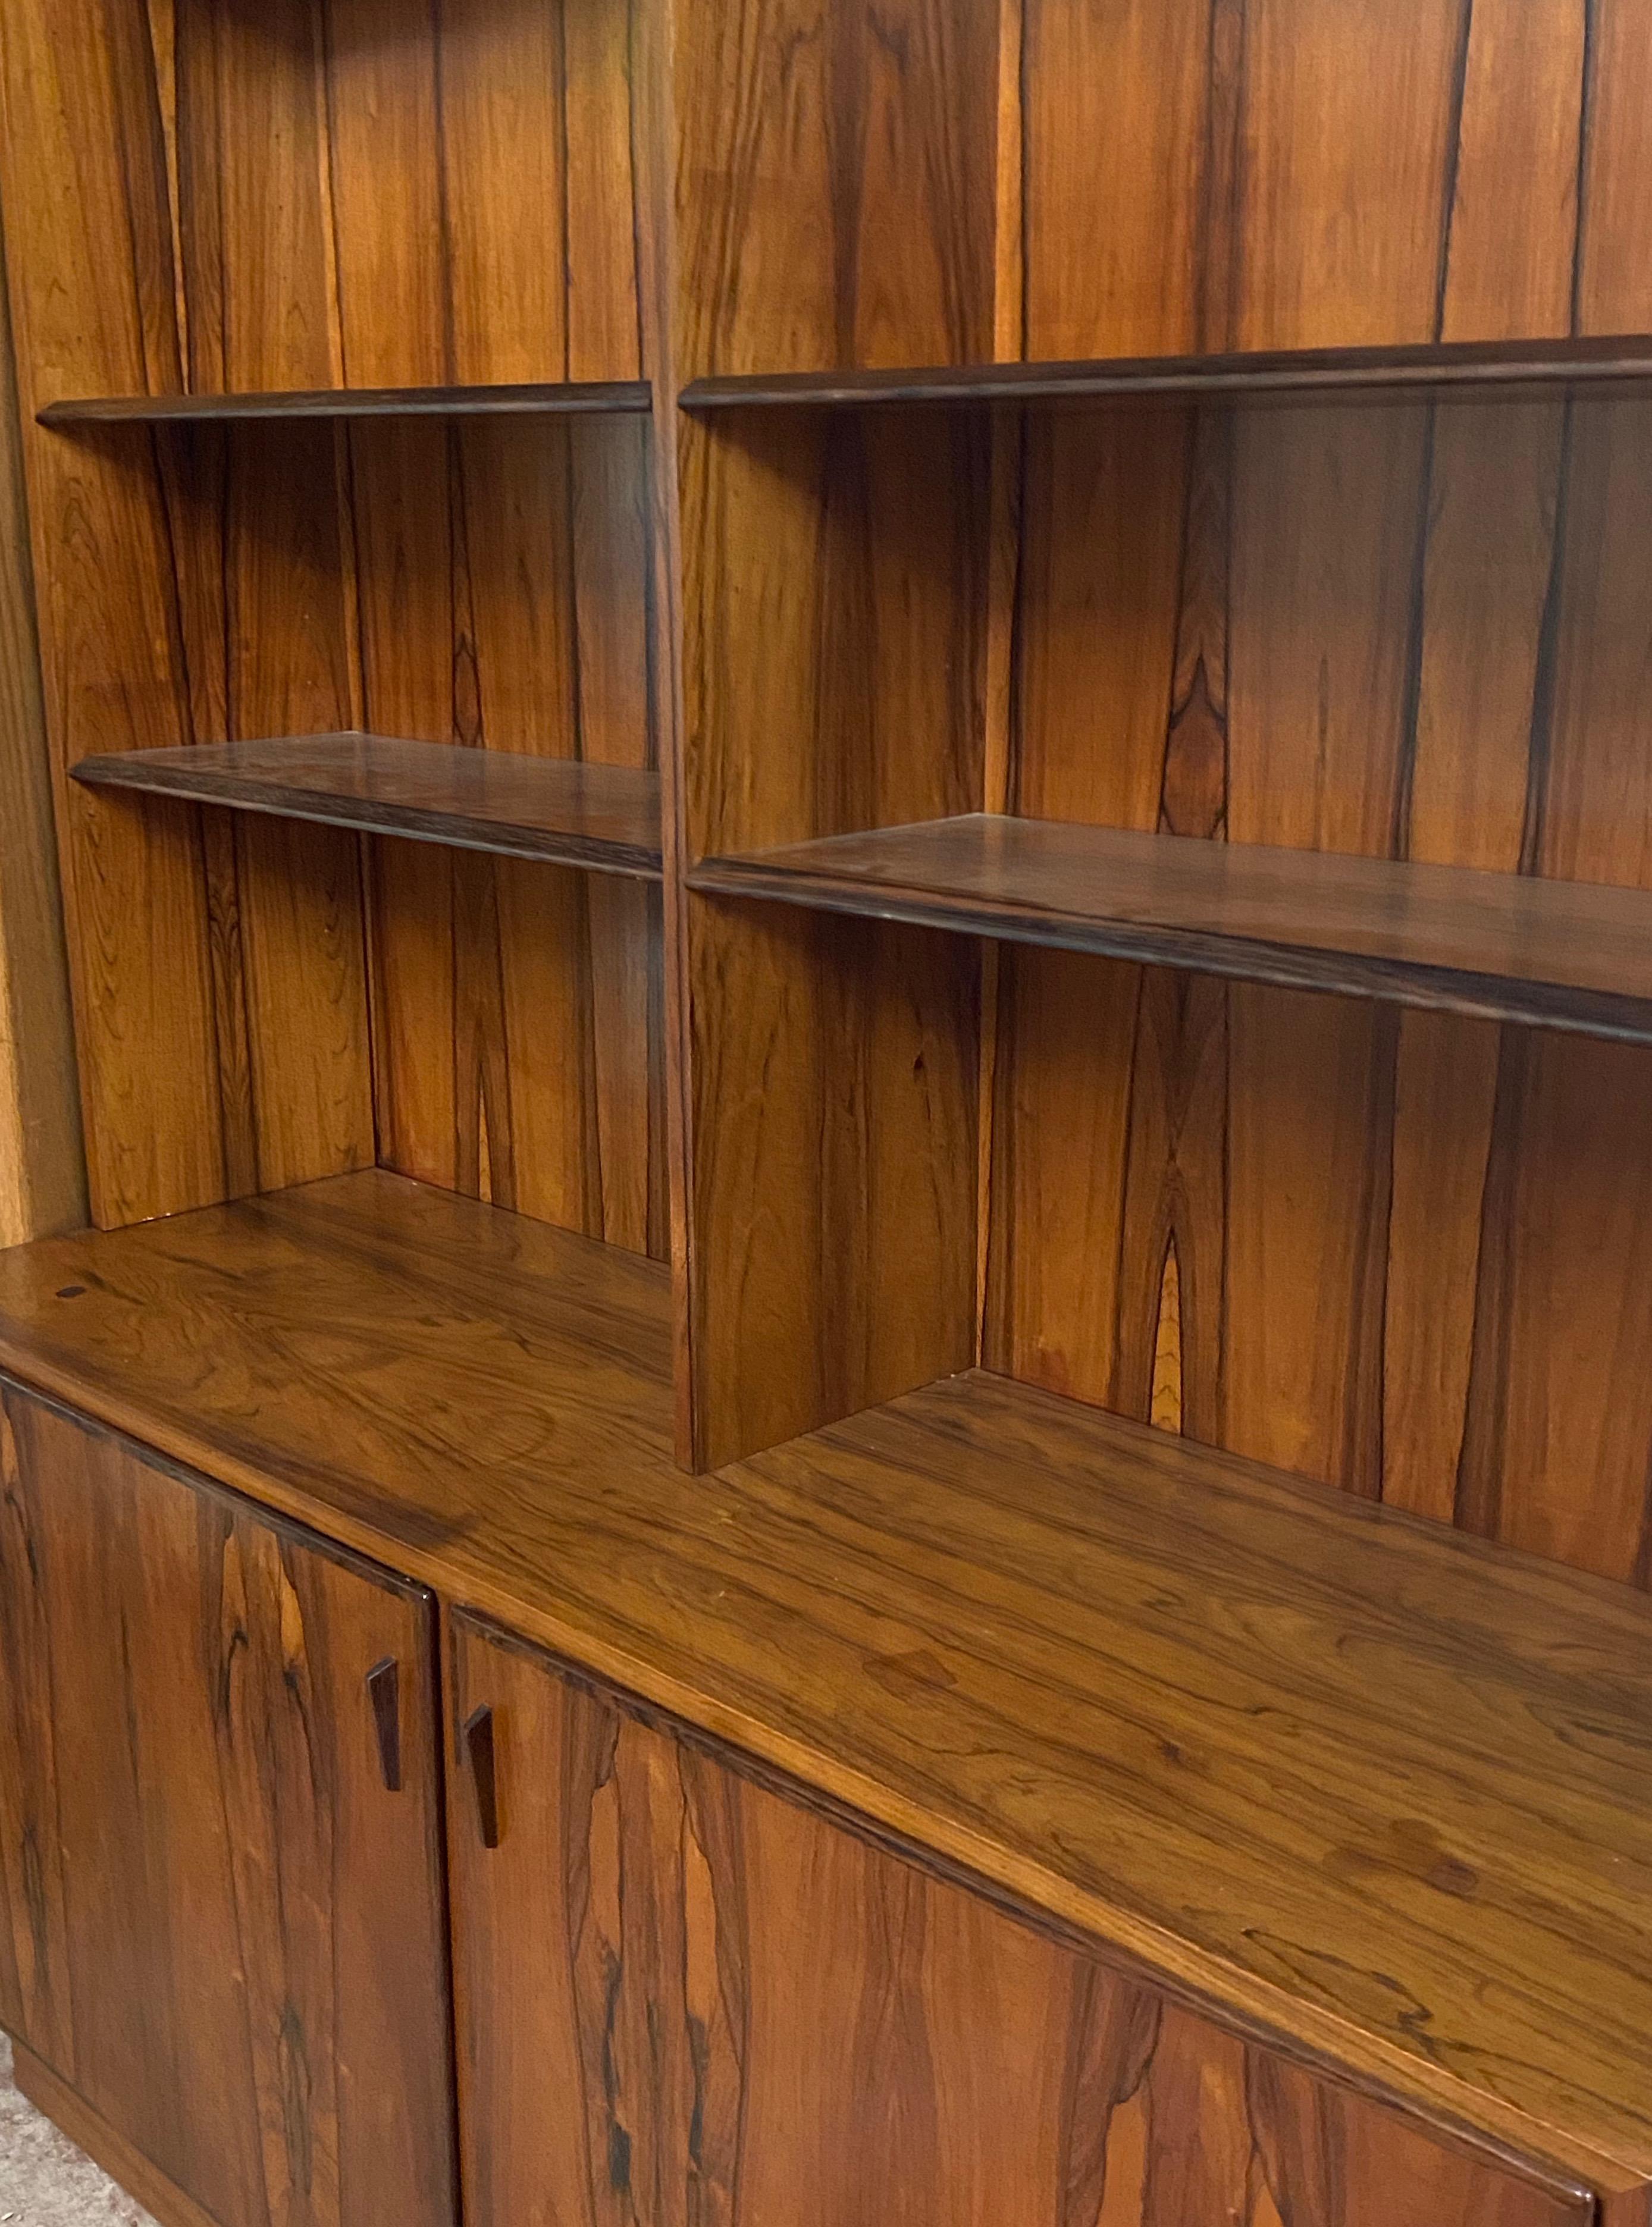 Danish modern rosewood bookcase / cabinet by Poul Hundevad, circa 1960s

Fantastic Danish bookcase by designer Poul Hundevad.

With upper open shelving and closed cabinet space below. The interior of the cabinet shows several pull-out drawers on